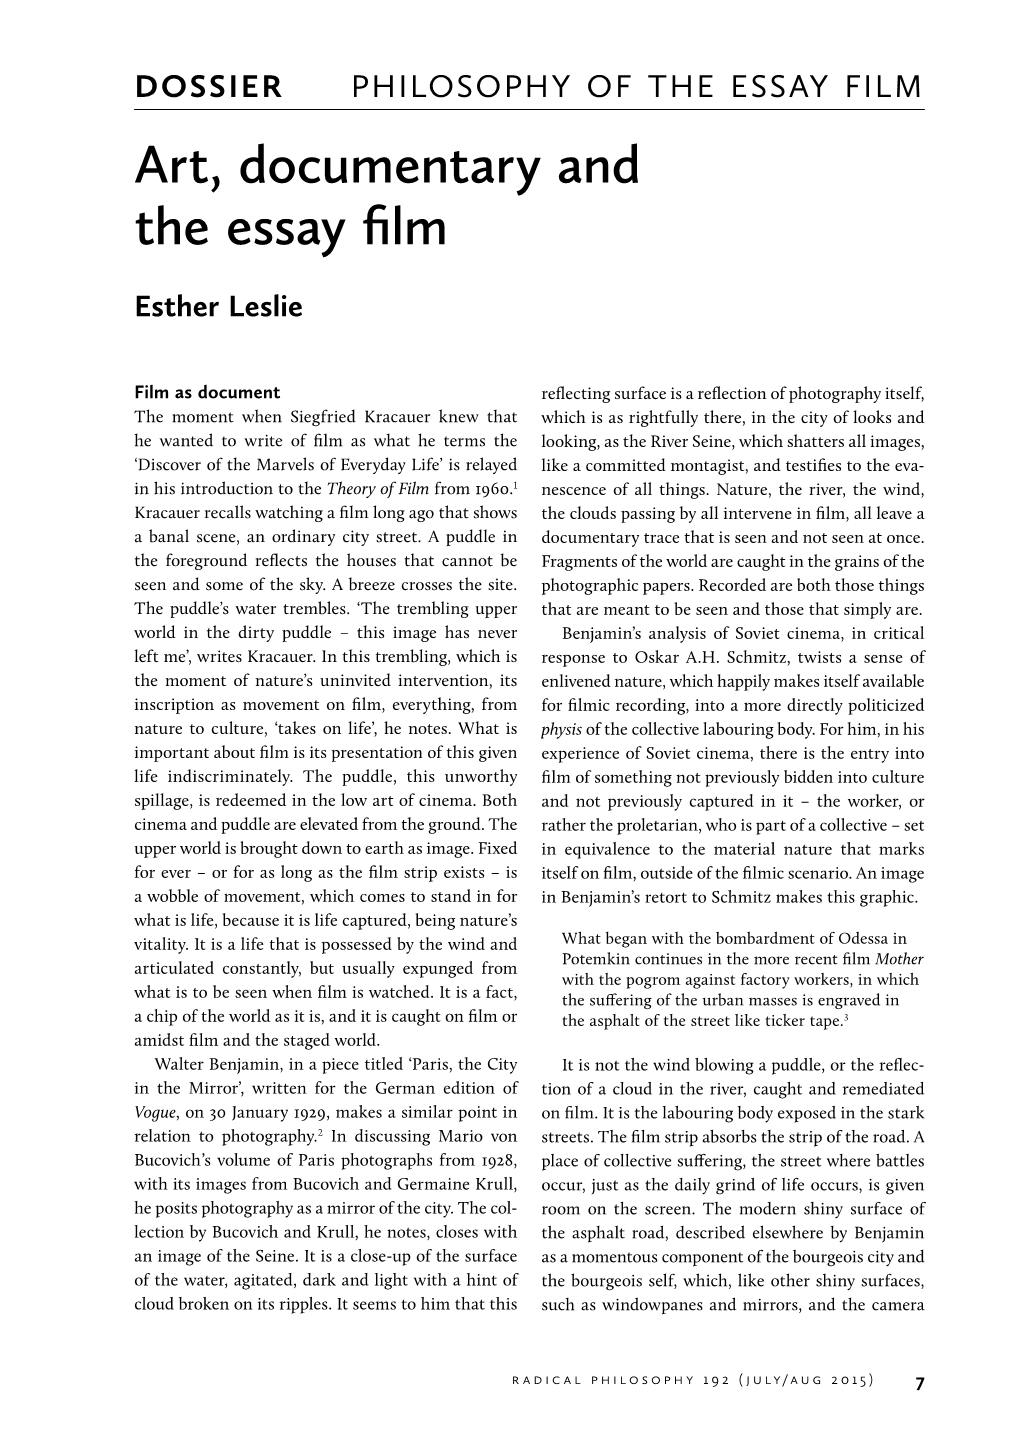 Art, Documentary and the Essay Film